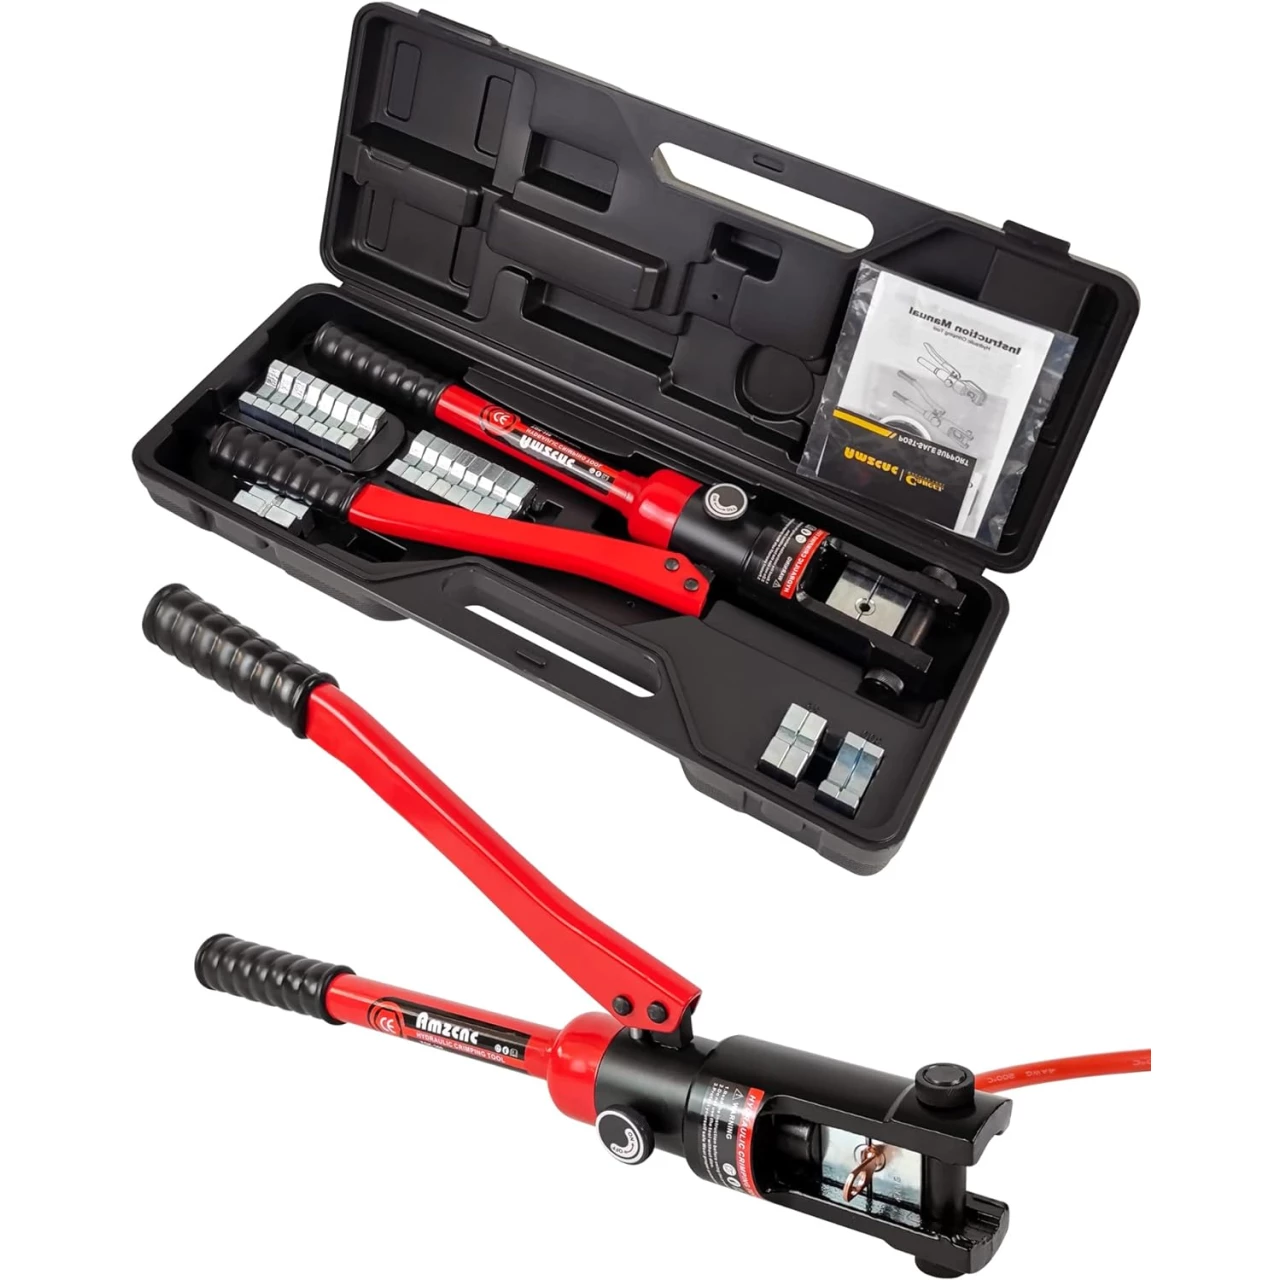 AMZCNC 16 Ton Hydraulic Wire Professional Hydraulic Battery Cable Lug Crimping Tool Set